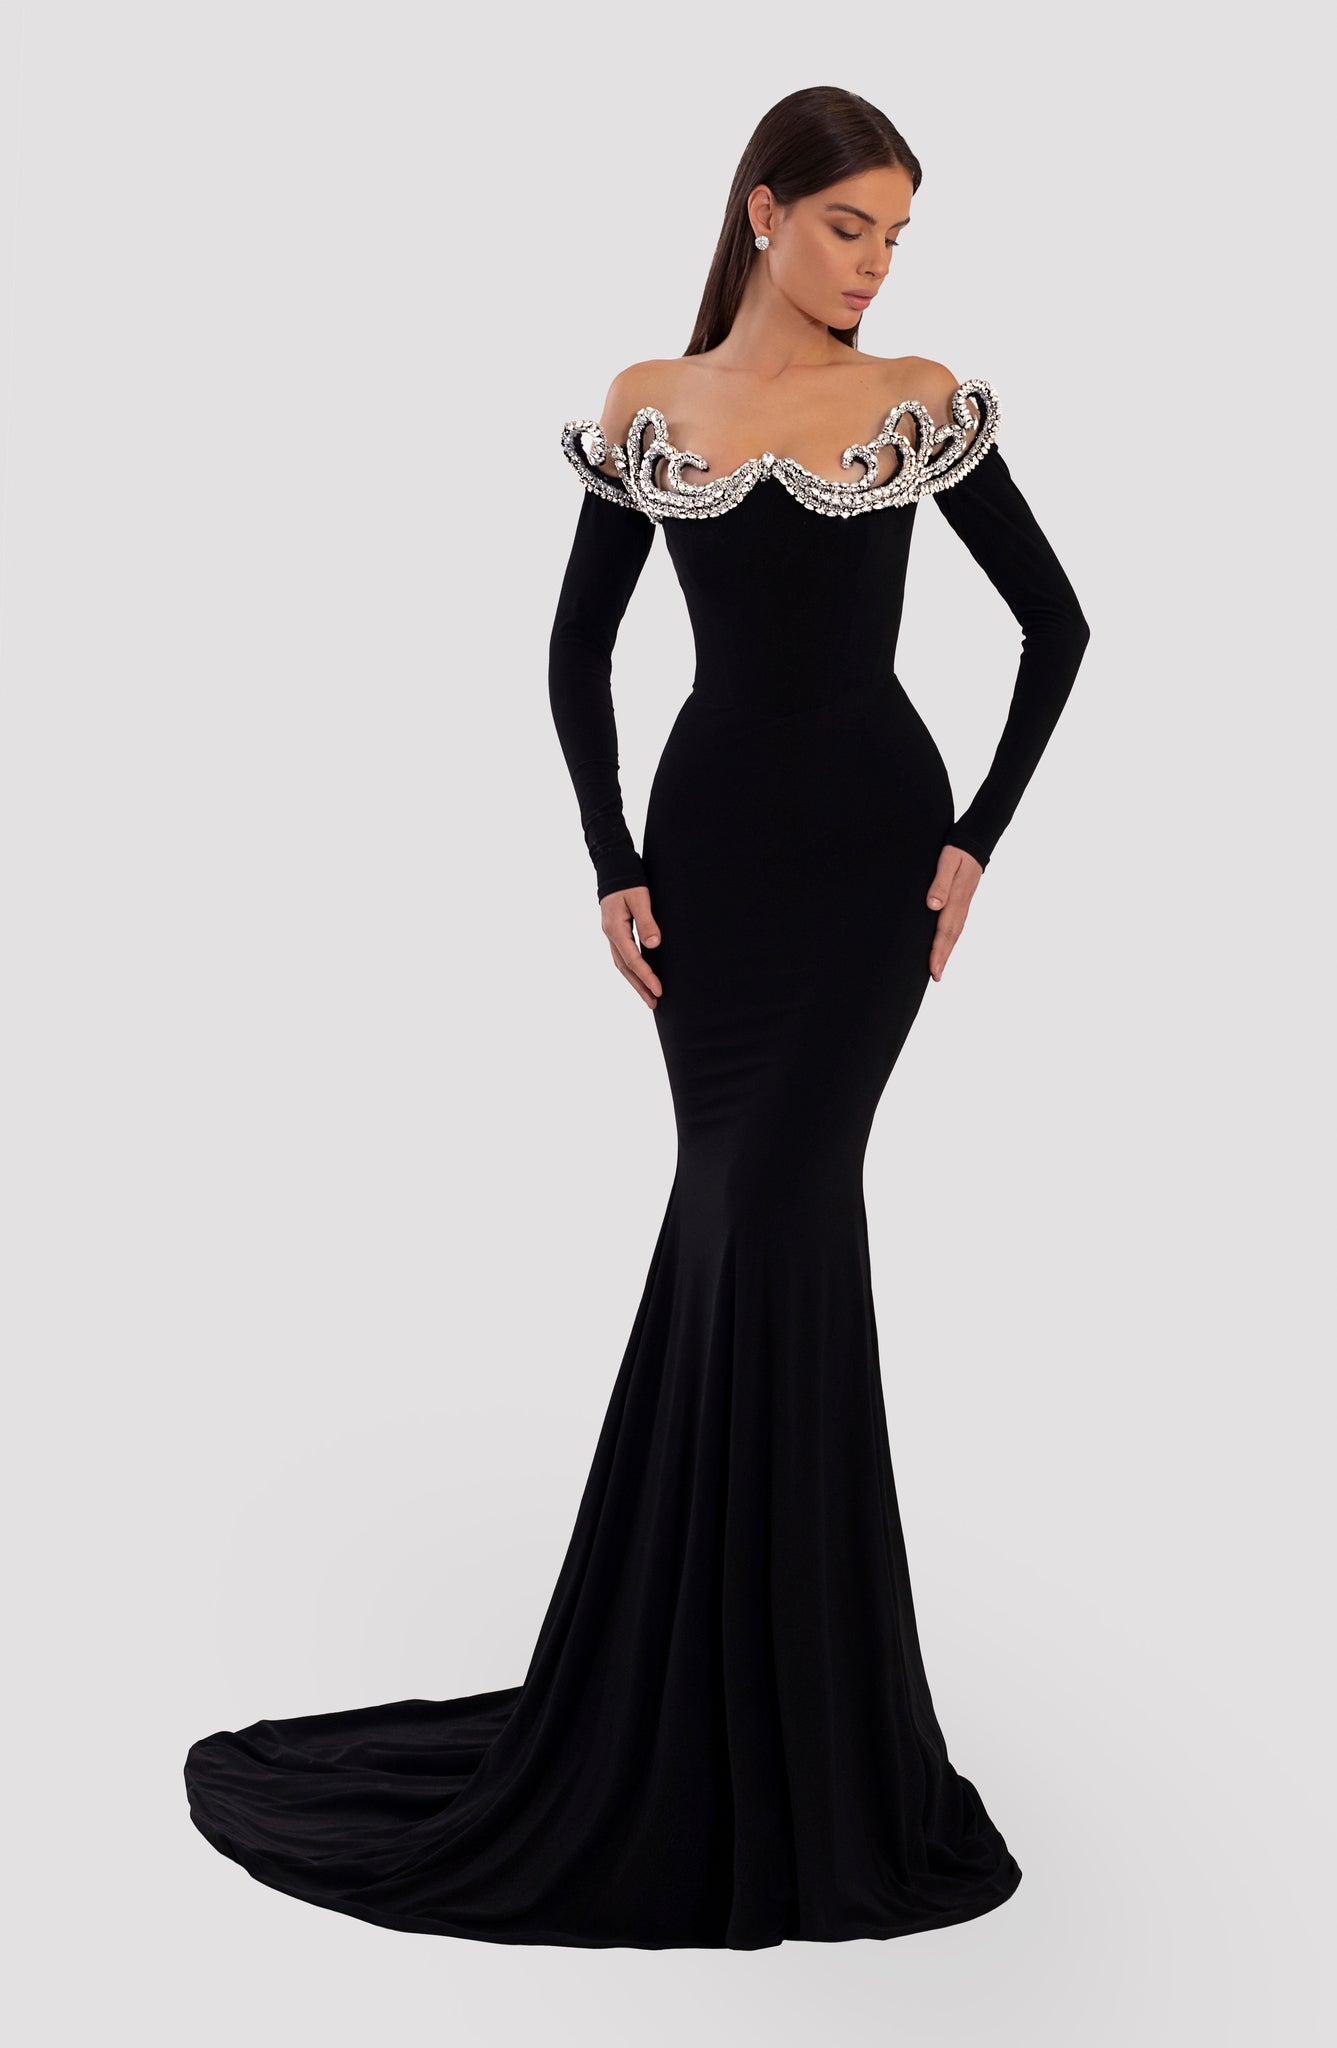 Formal Dresses, Black Prom Gown .Illusion Ball Gown,Evening Lace Appliques  Black,Long Vestidos,With Pocket;De Fiesta From Newdeve, $119.08 | DHgate.Com